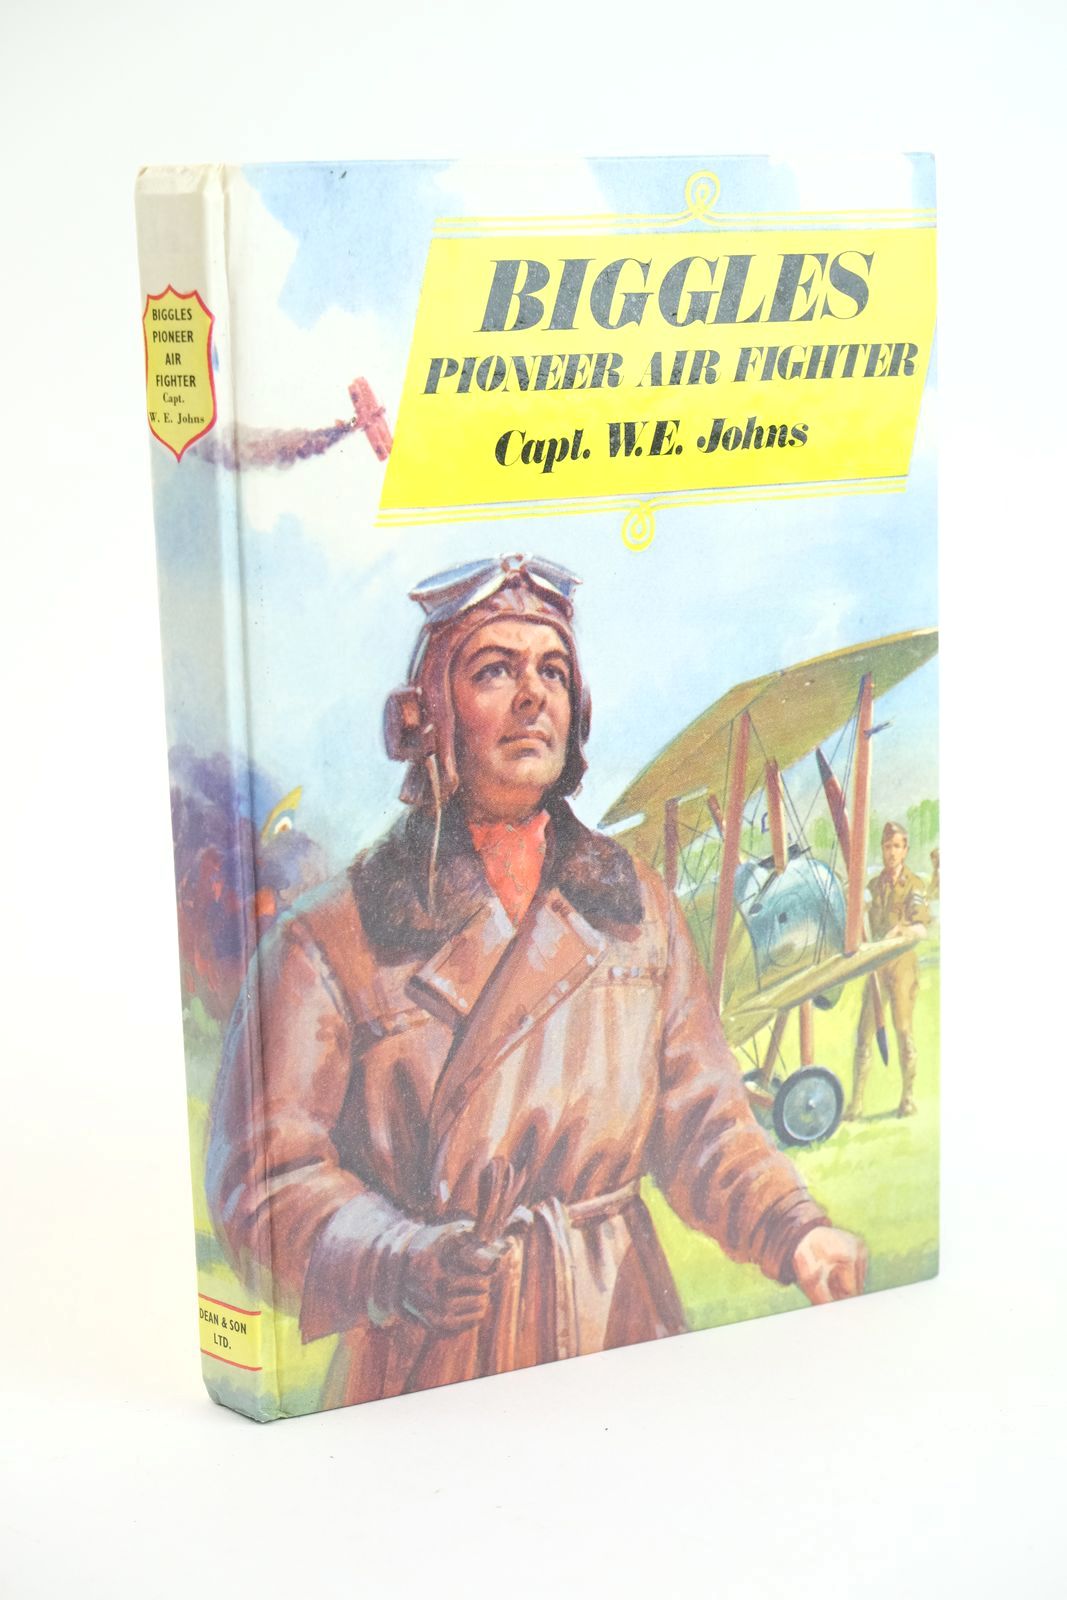 Photo of BIGGLES PIONEER AIR FIGHTER written by Johns, W.E. published by Dean & Son Ltd. (STOCK CODE: 1323889)  for sale by Stella & Rose's Books